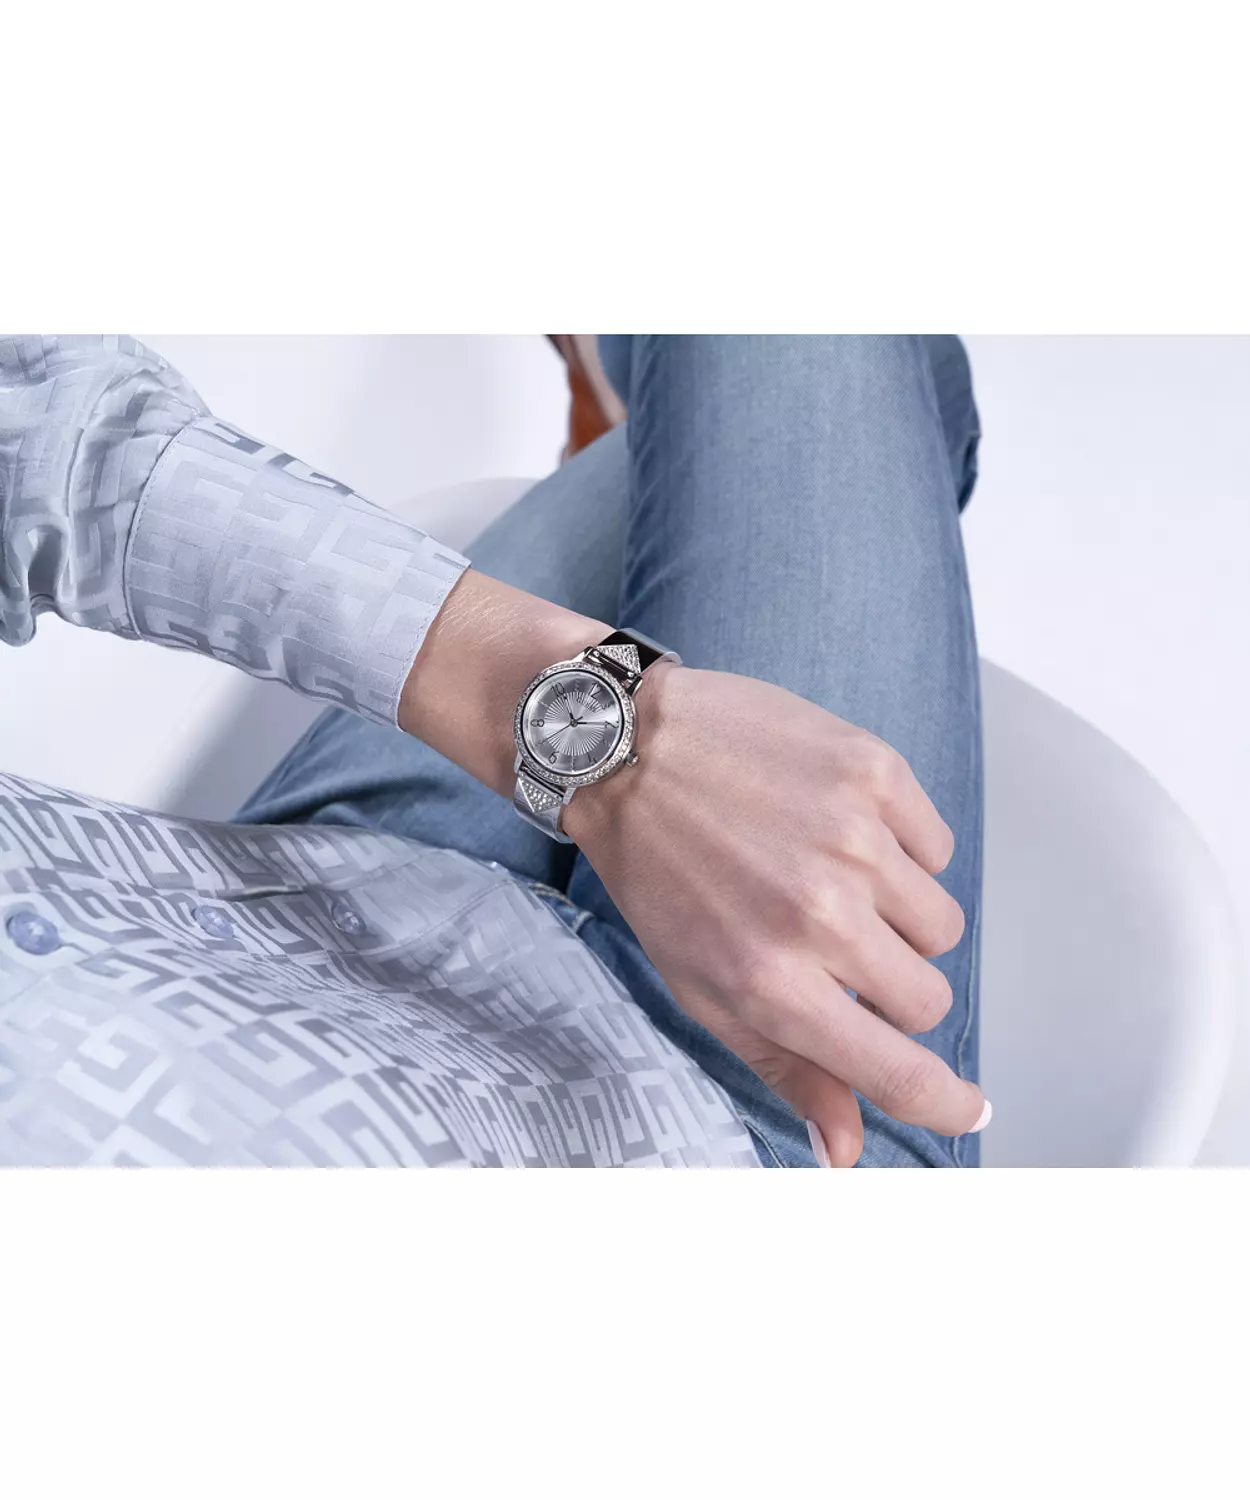 GUESS GW0474L1 ANALOG WATCH For Women Round Shape Silver Stainless Steel Polished Bracelet 6